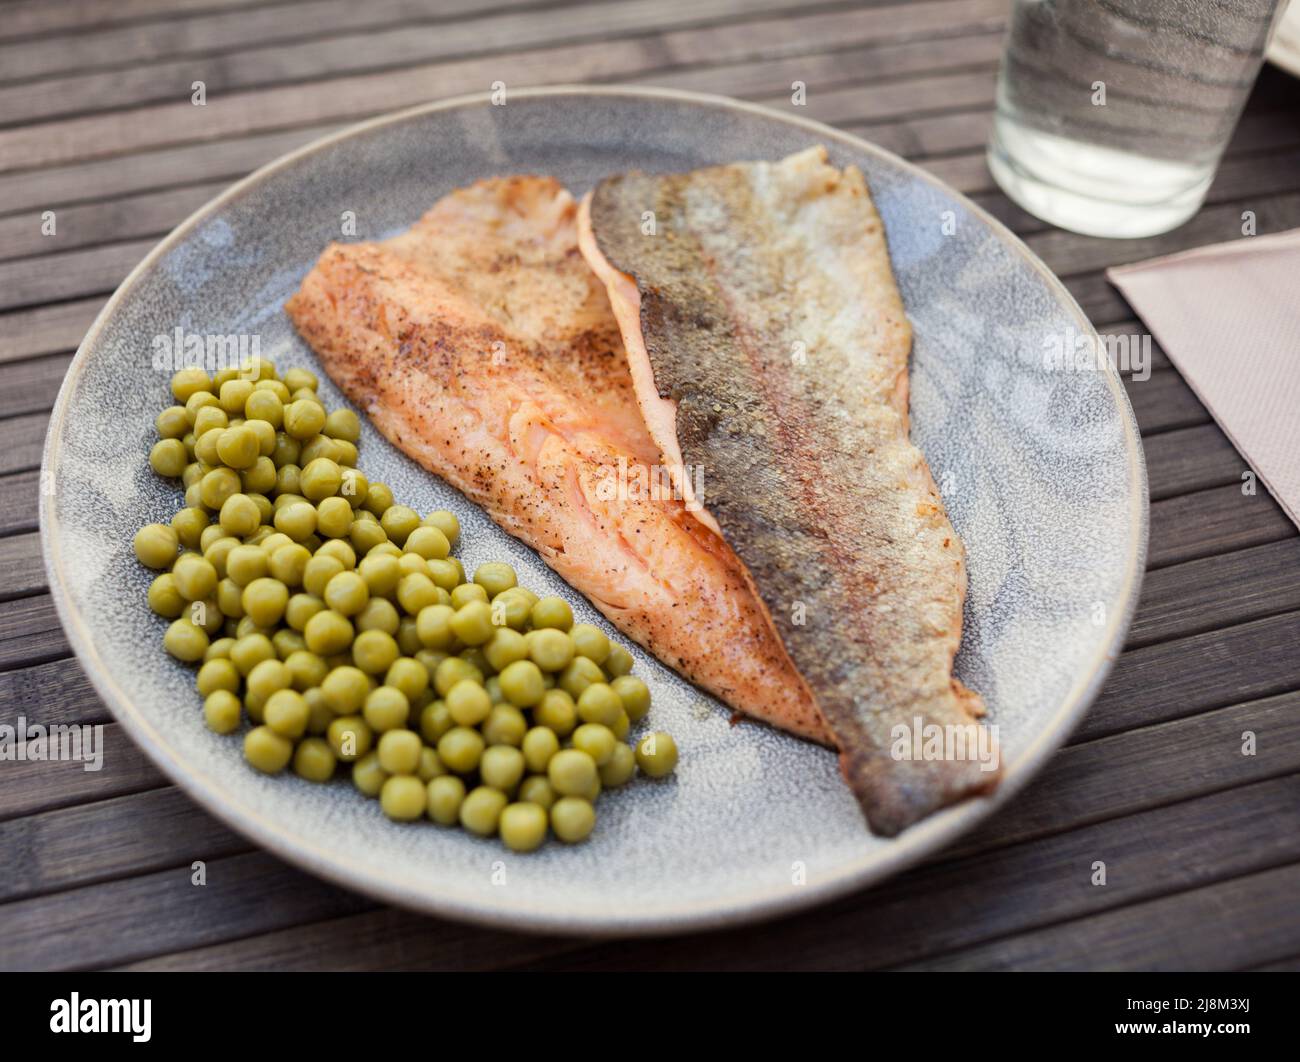 Top view of baked trout fillet served on plate with peas closeup Stock Photo